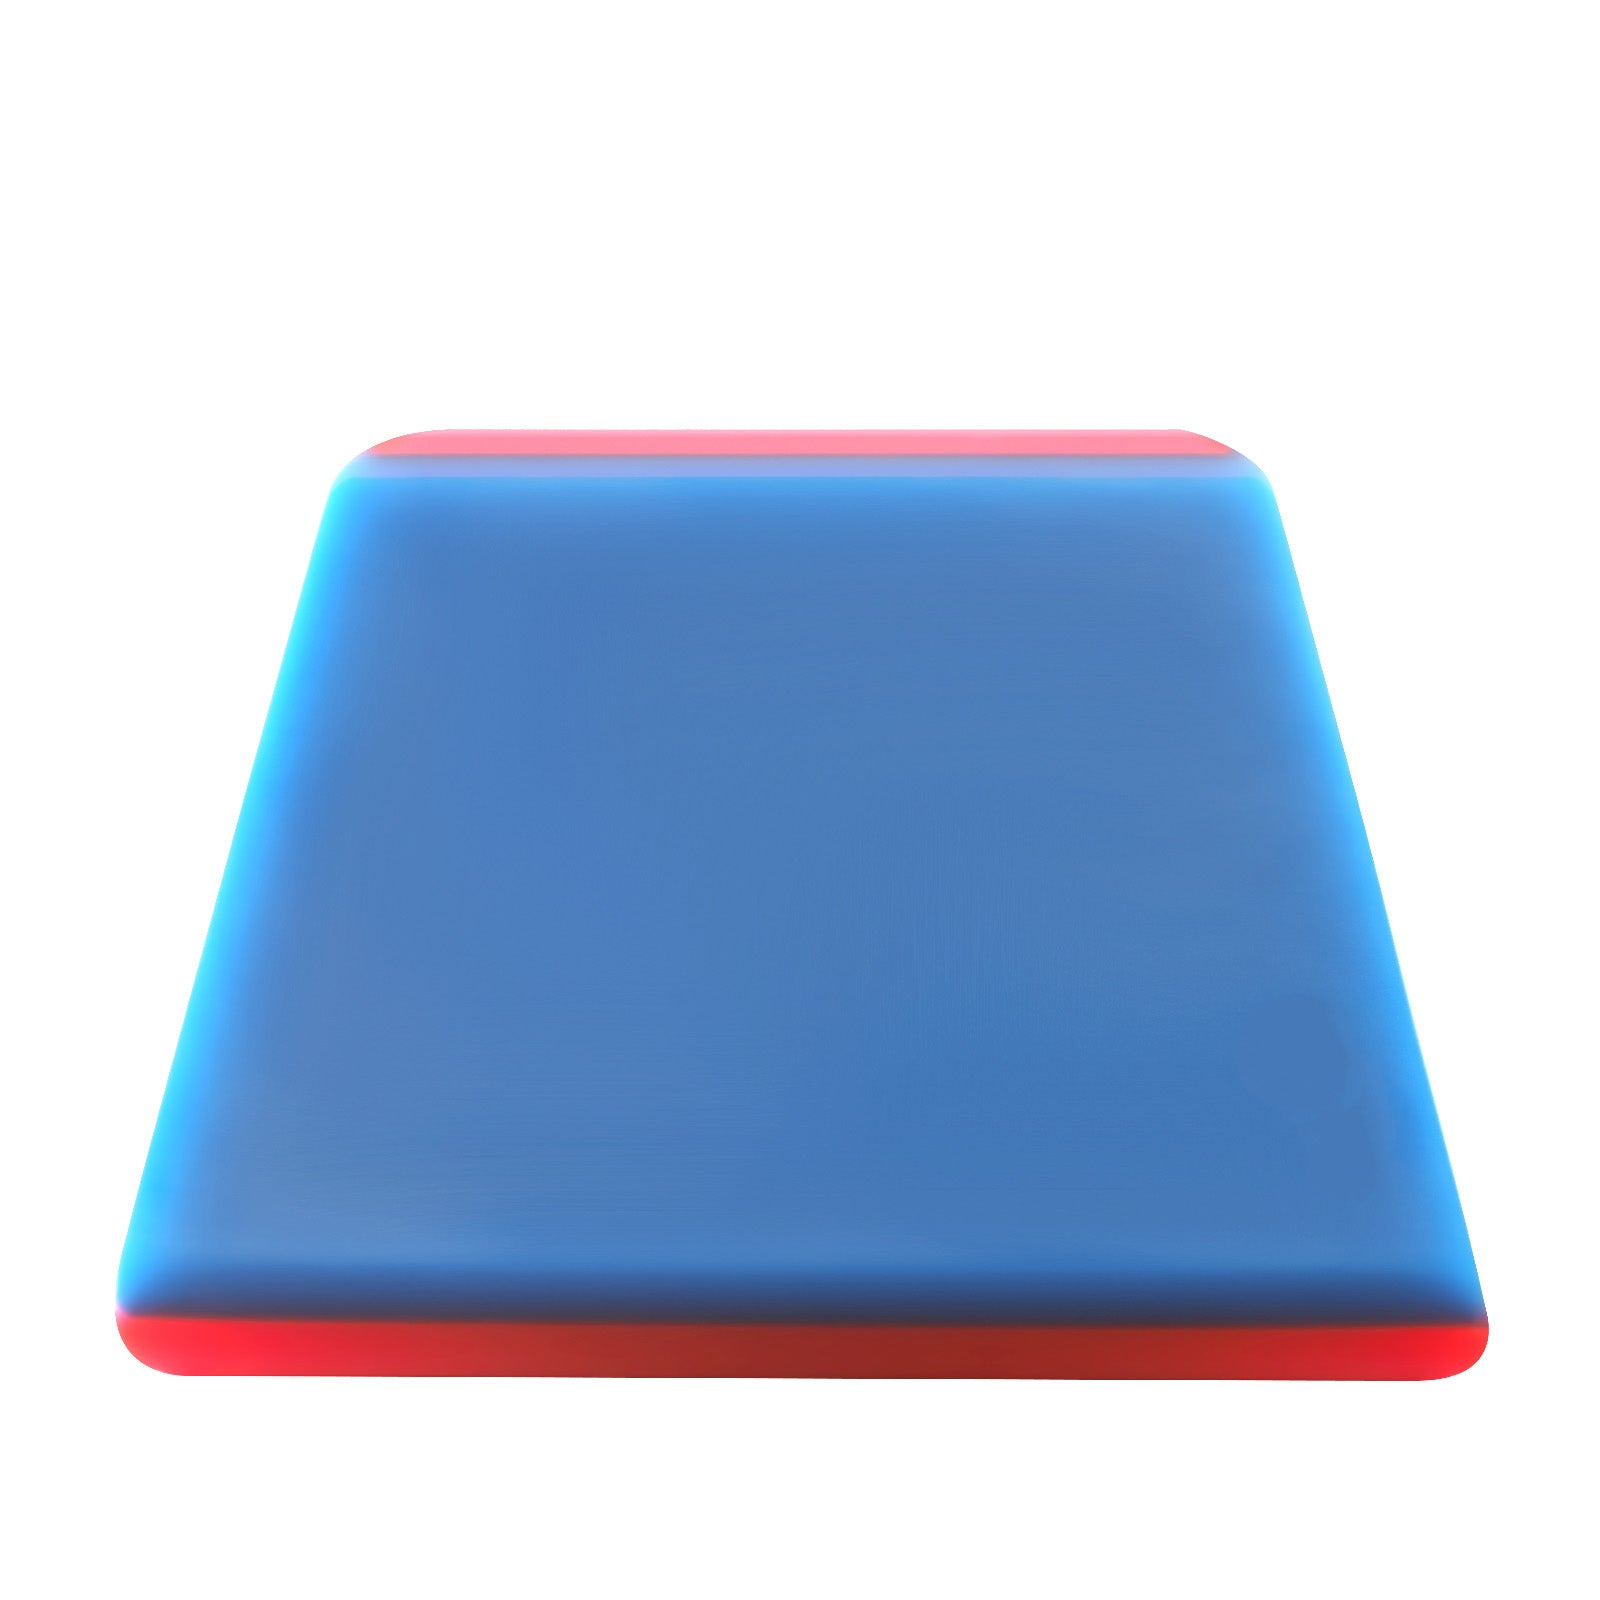 2-Layer PPF Squeegee with Cropped Edge displayed in blue, highlighting its dual TPU layers for film installation.